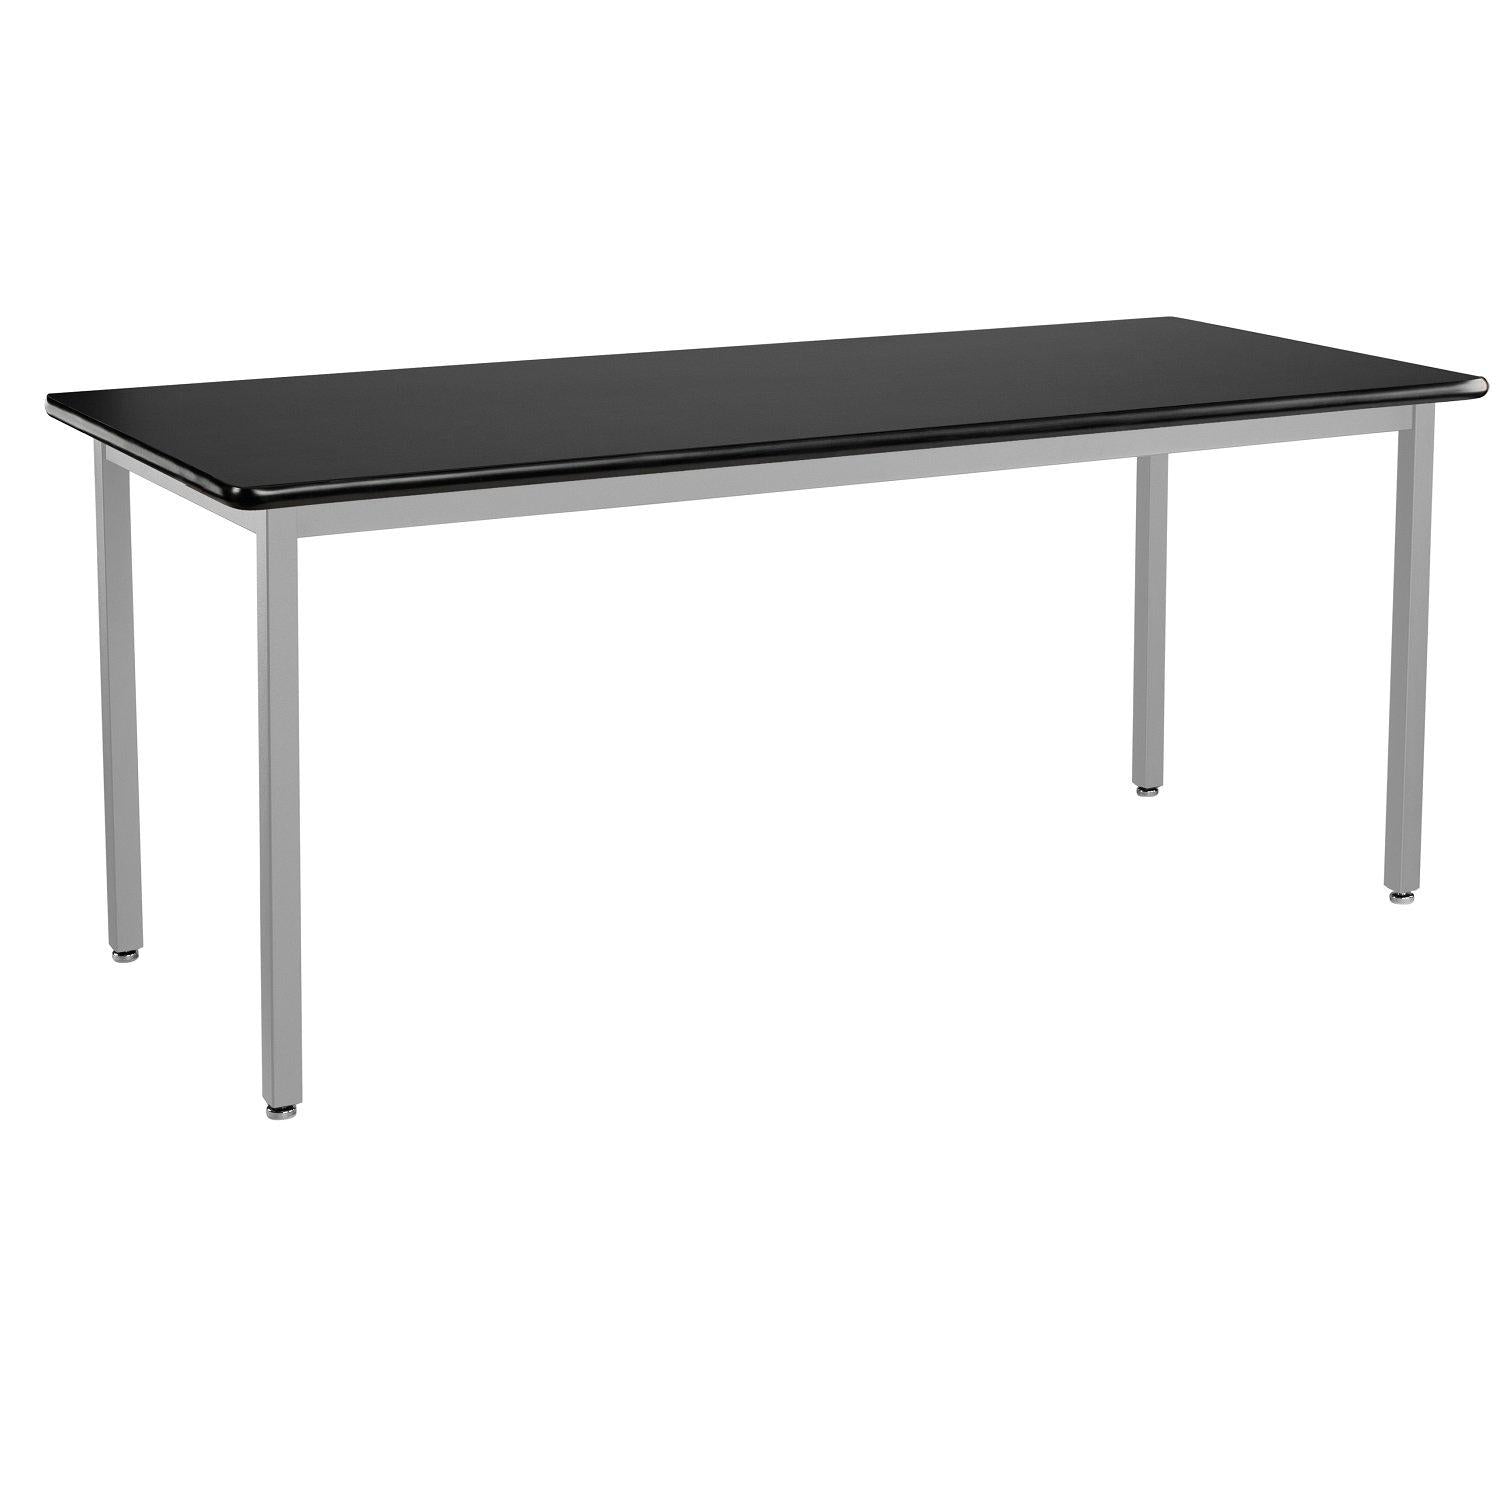 Heavy-Duty Fixed Height Utility Table, Soft Grey Frame, 24" x 96", High-Pressure Laminate Top with T-Mold Edge